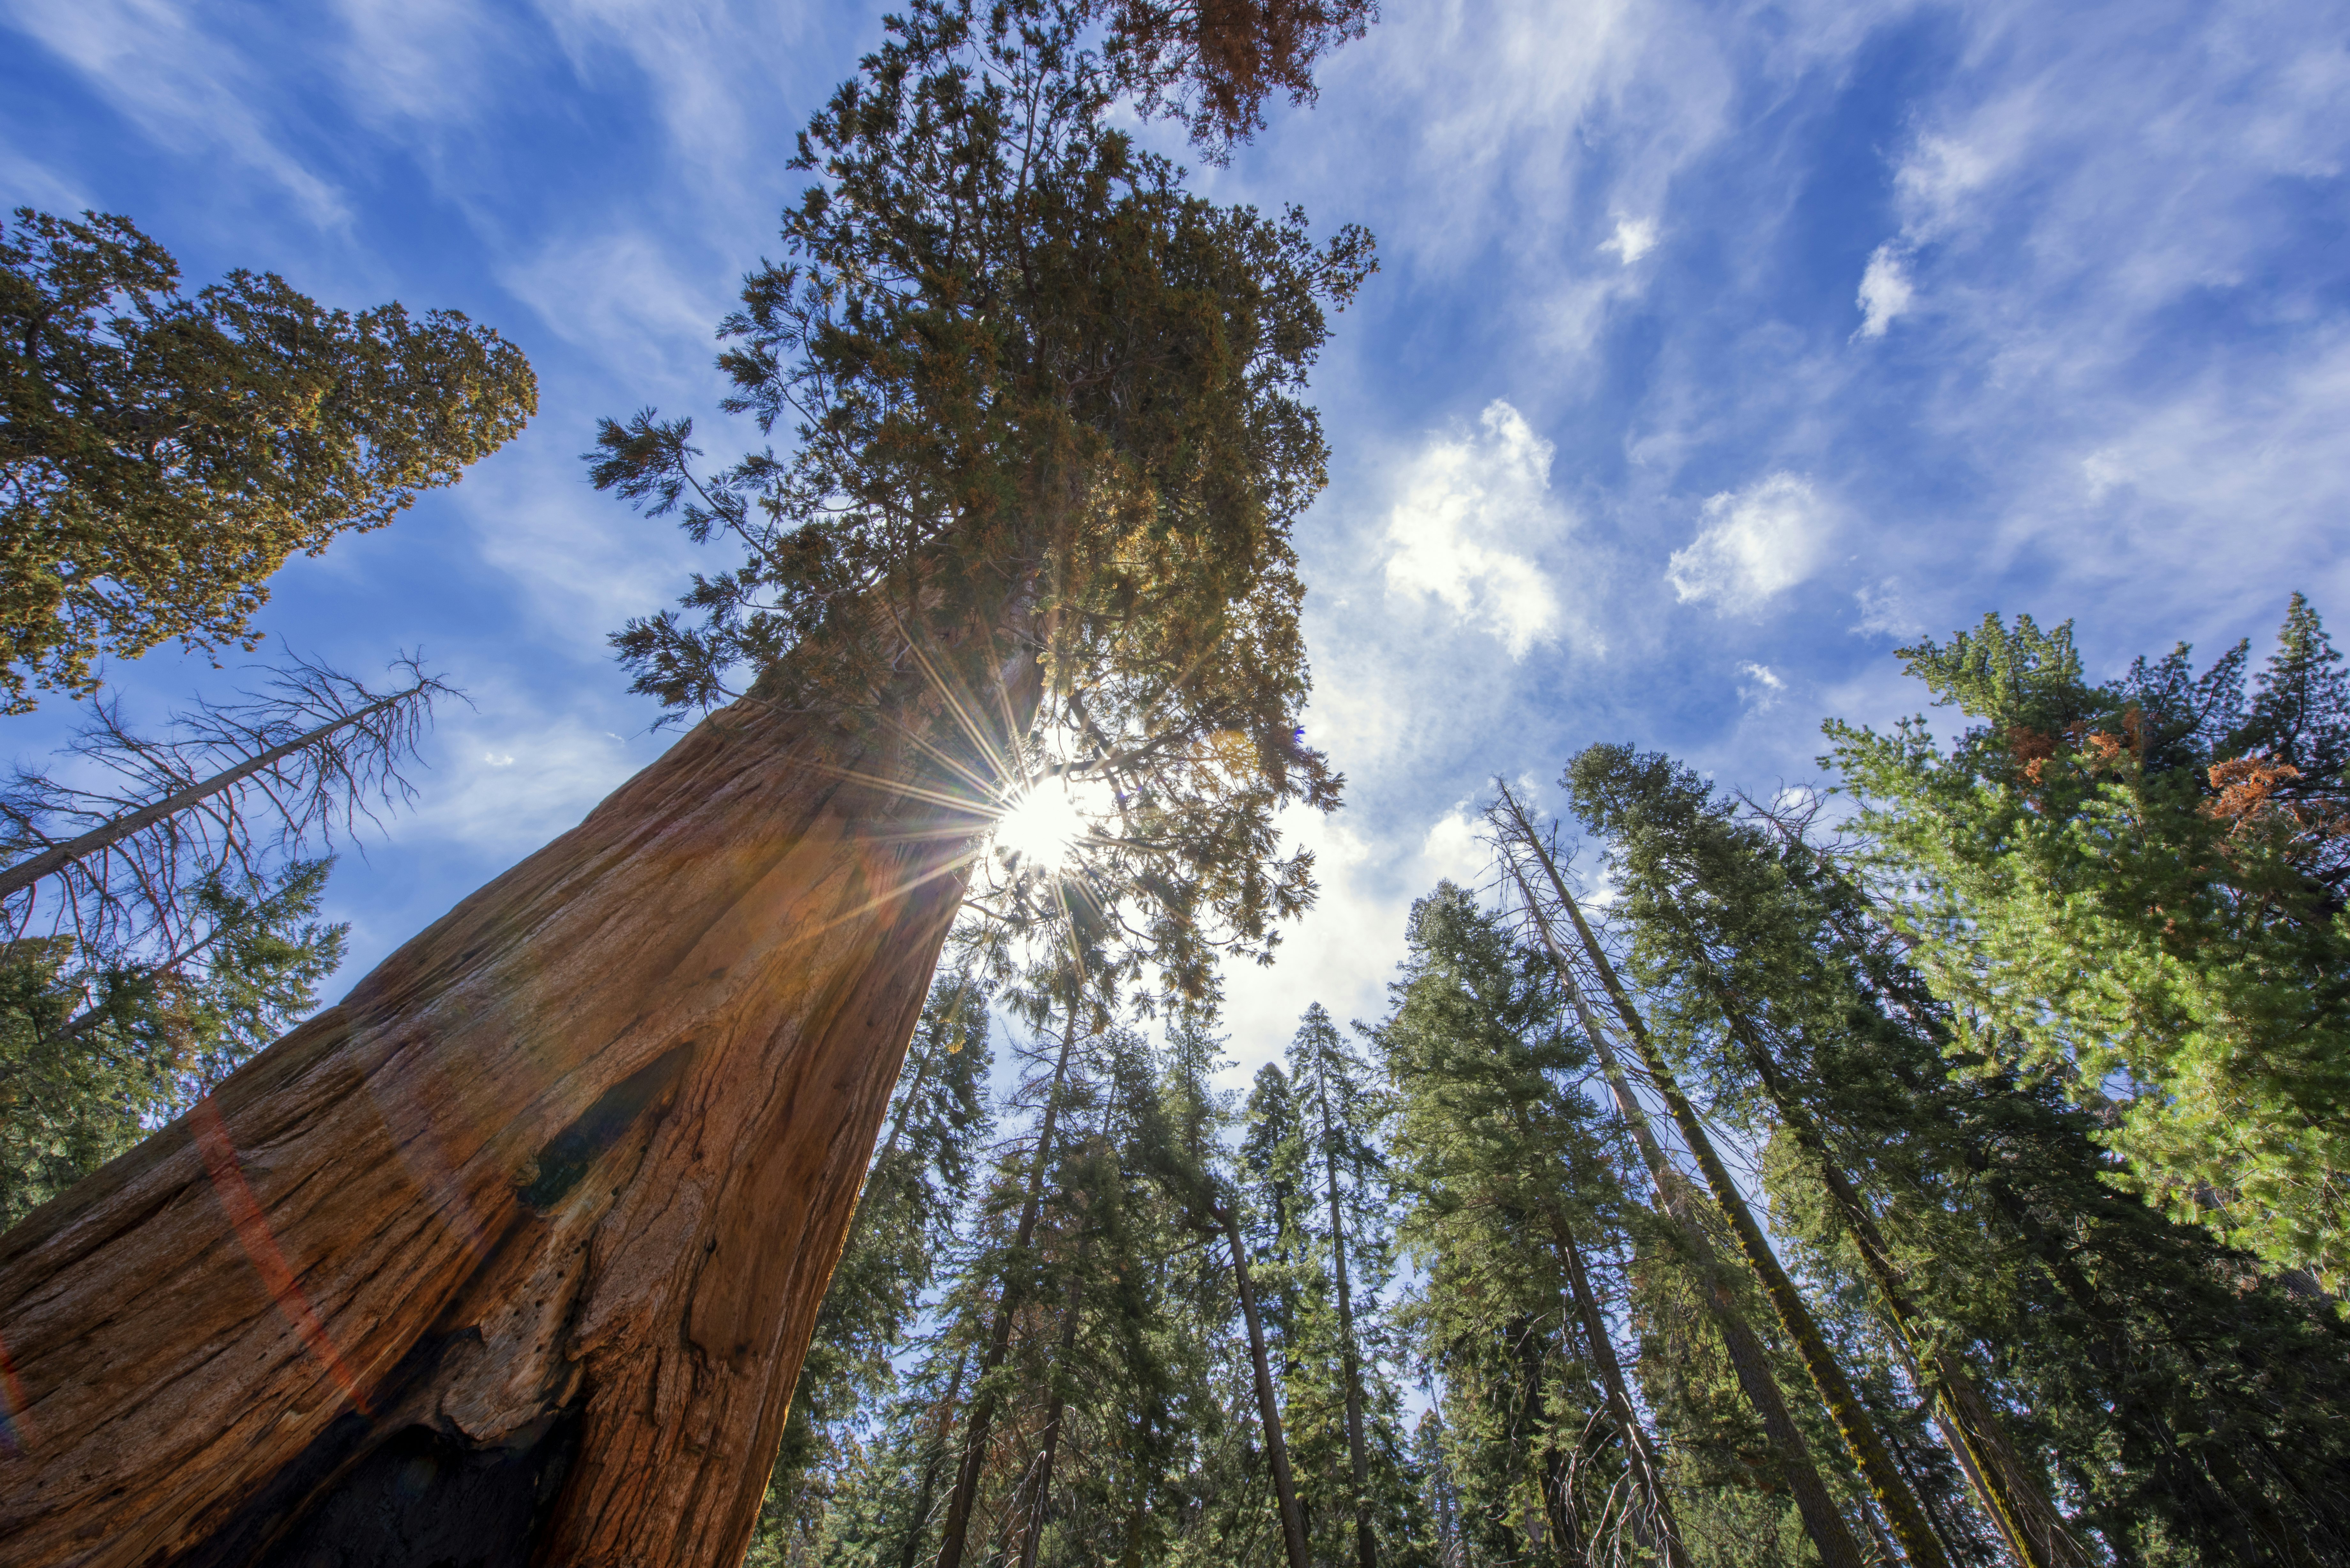 Looking up at a giant Sequoia tree with the sun bursting through on a partly cloudy day.